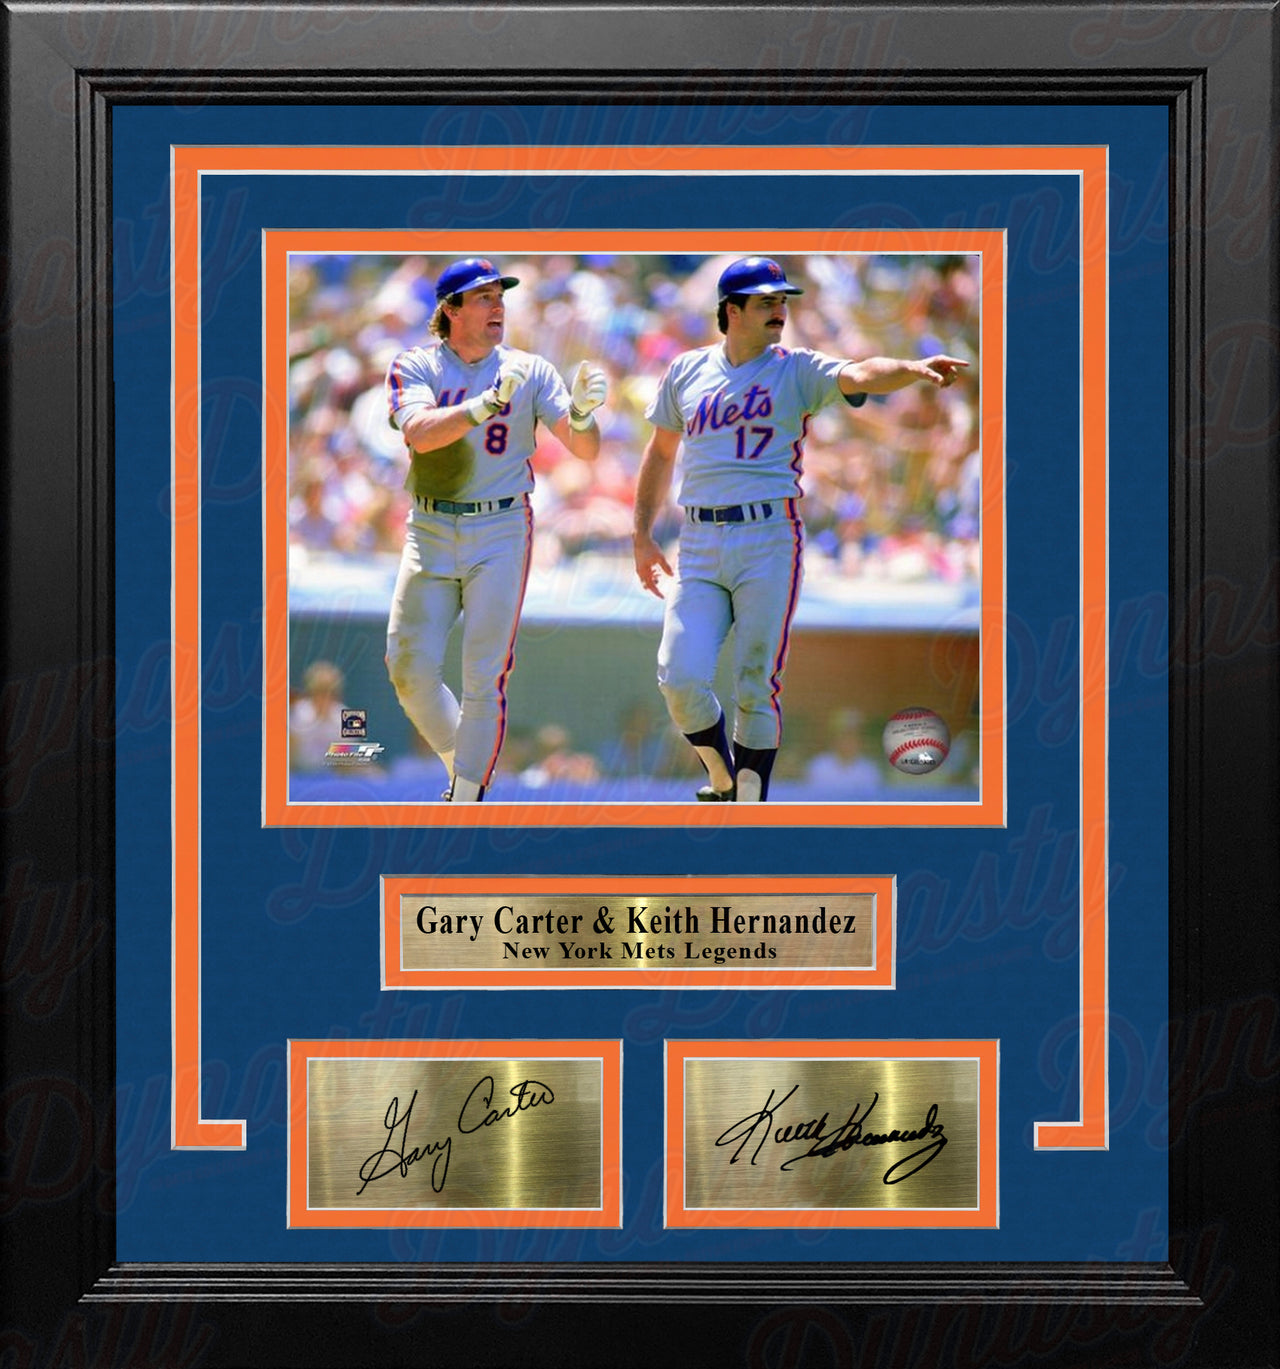 Gary Carter & Keith Hernandez in Action New York Mets 8" x 10" Framed Photo with Engraved Autographs - Dynasty Sports & Framing 